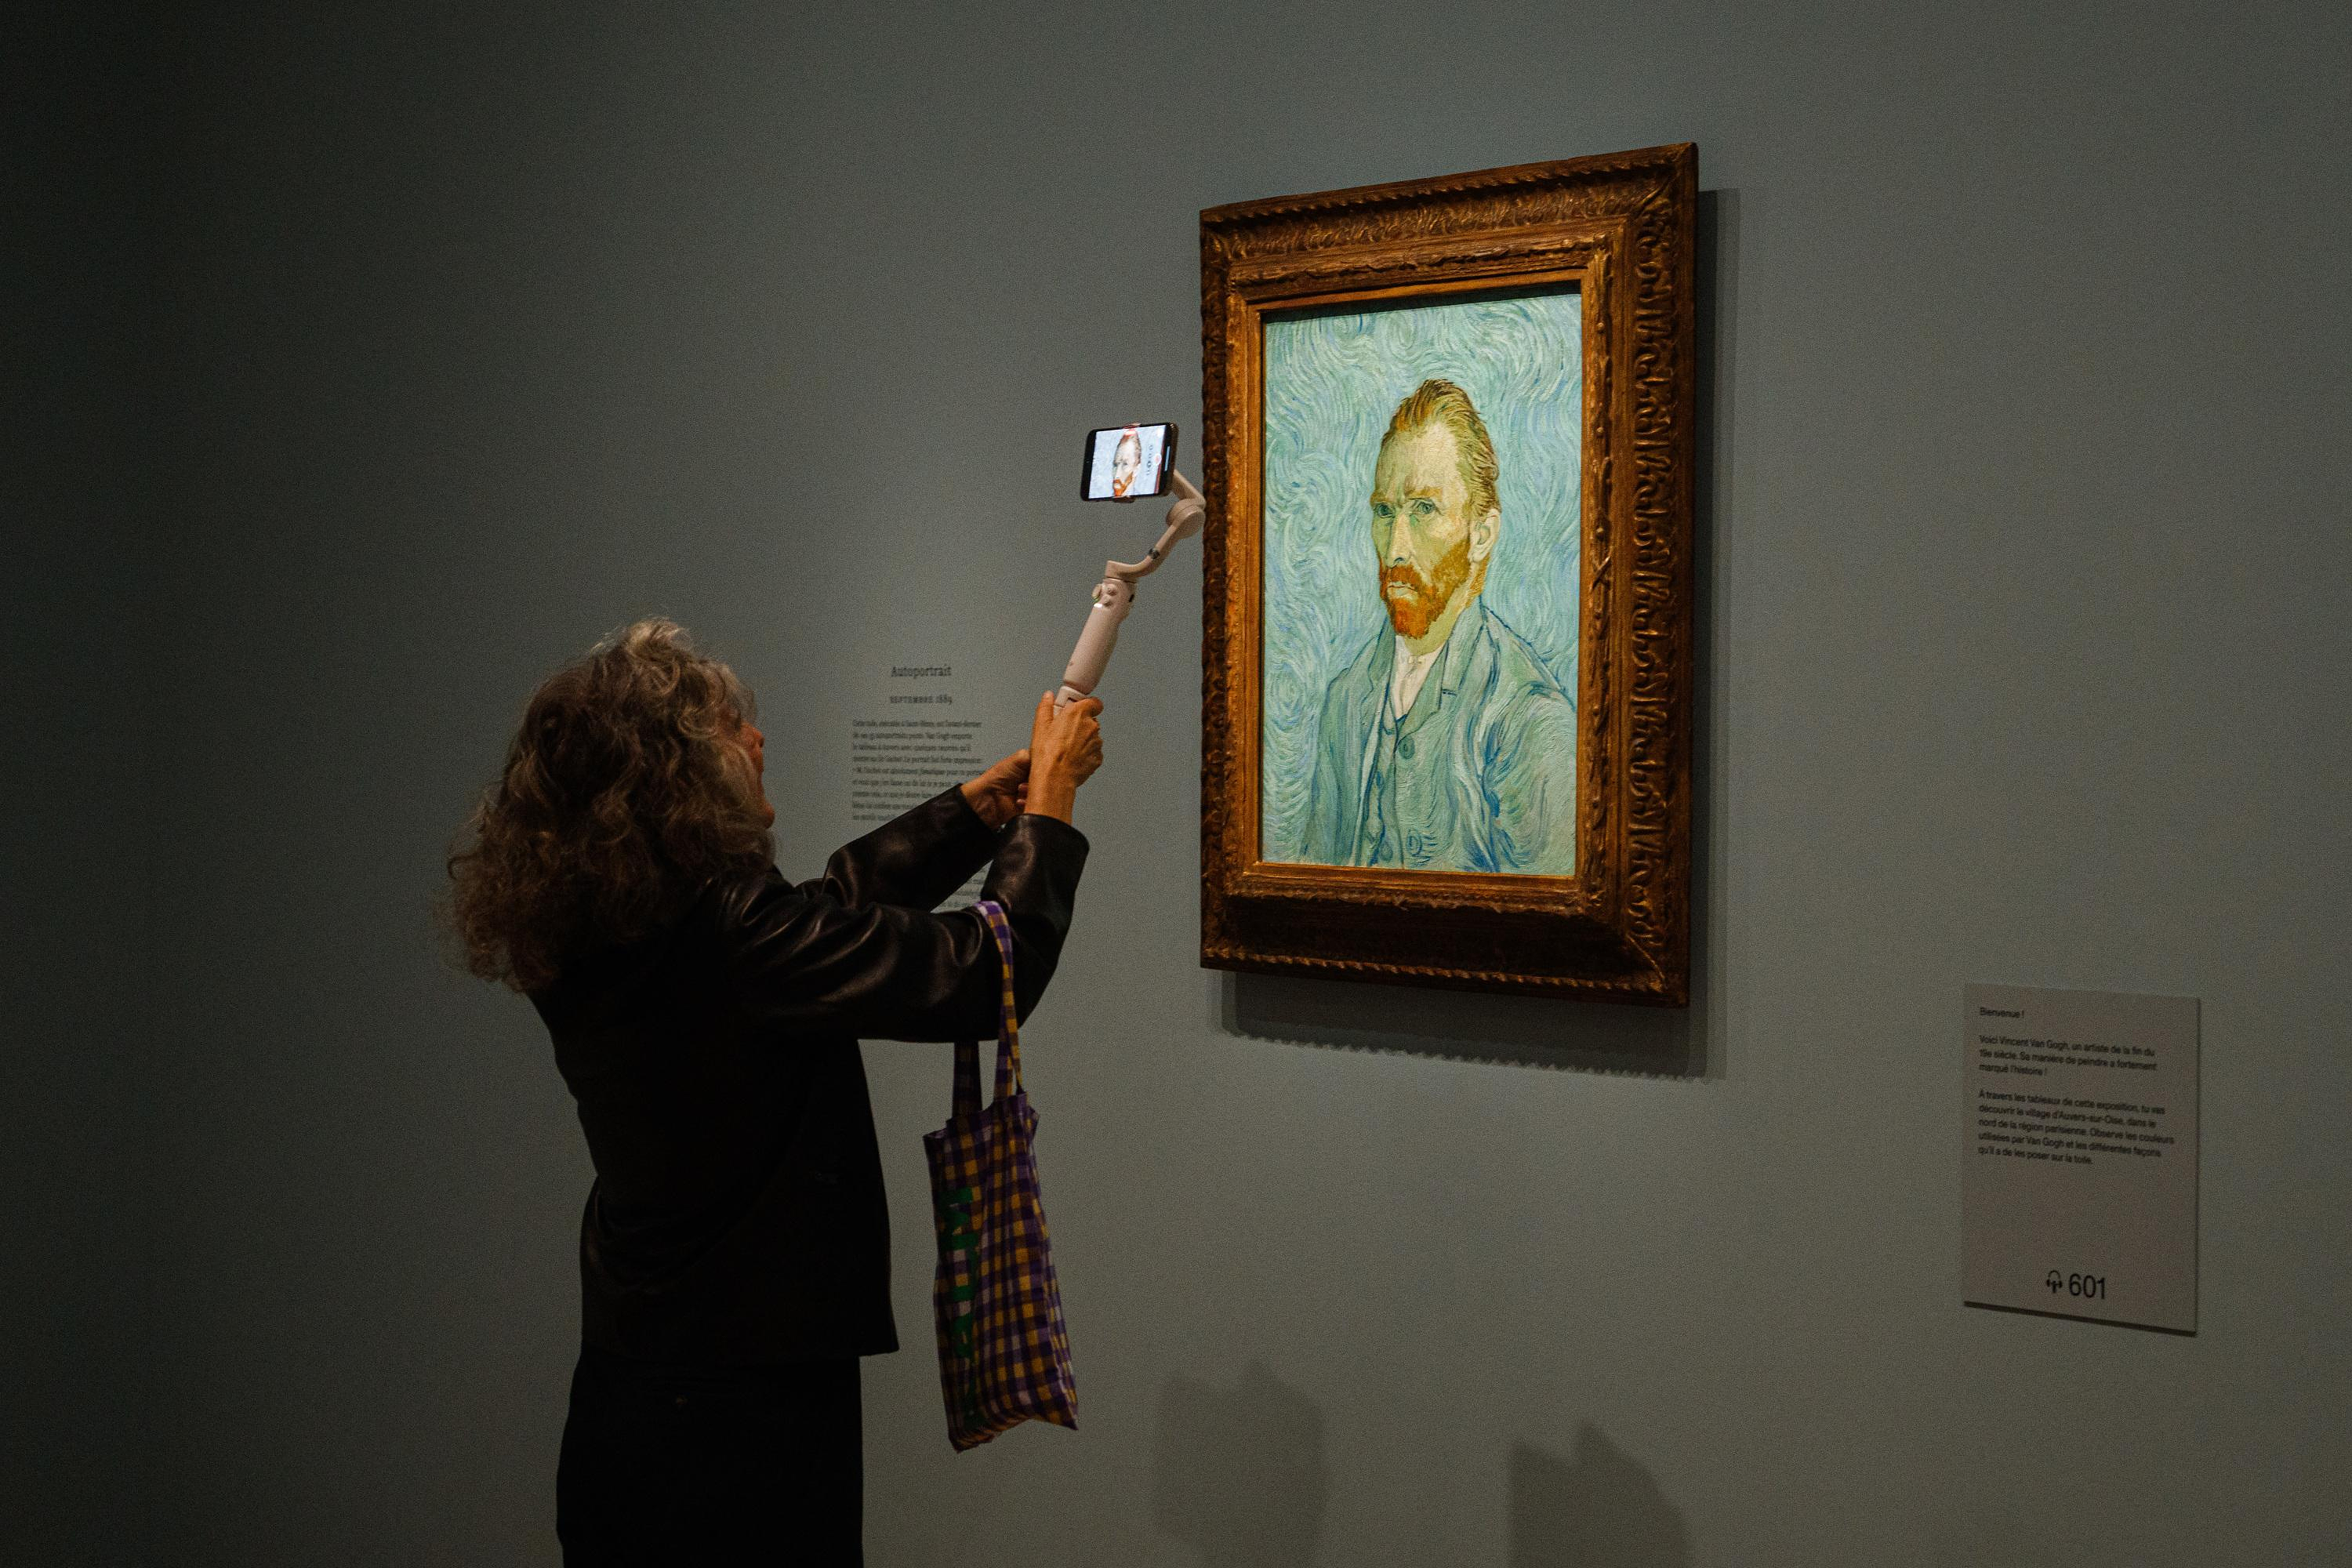 Van Gogh breaks all records in Orsay with nearly 800,000 visitors